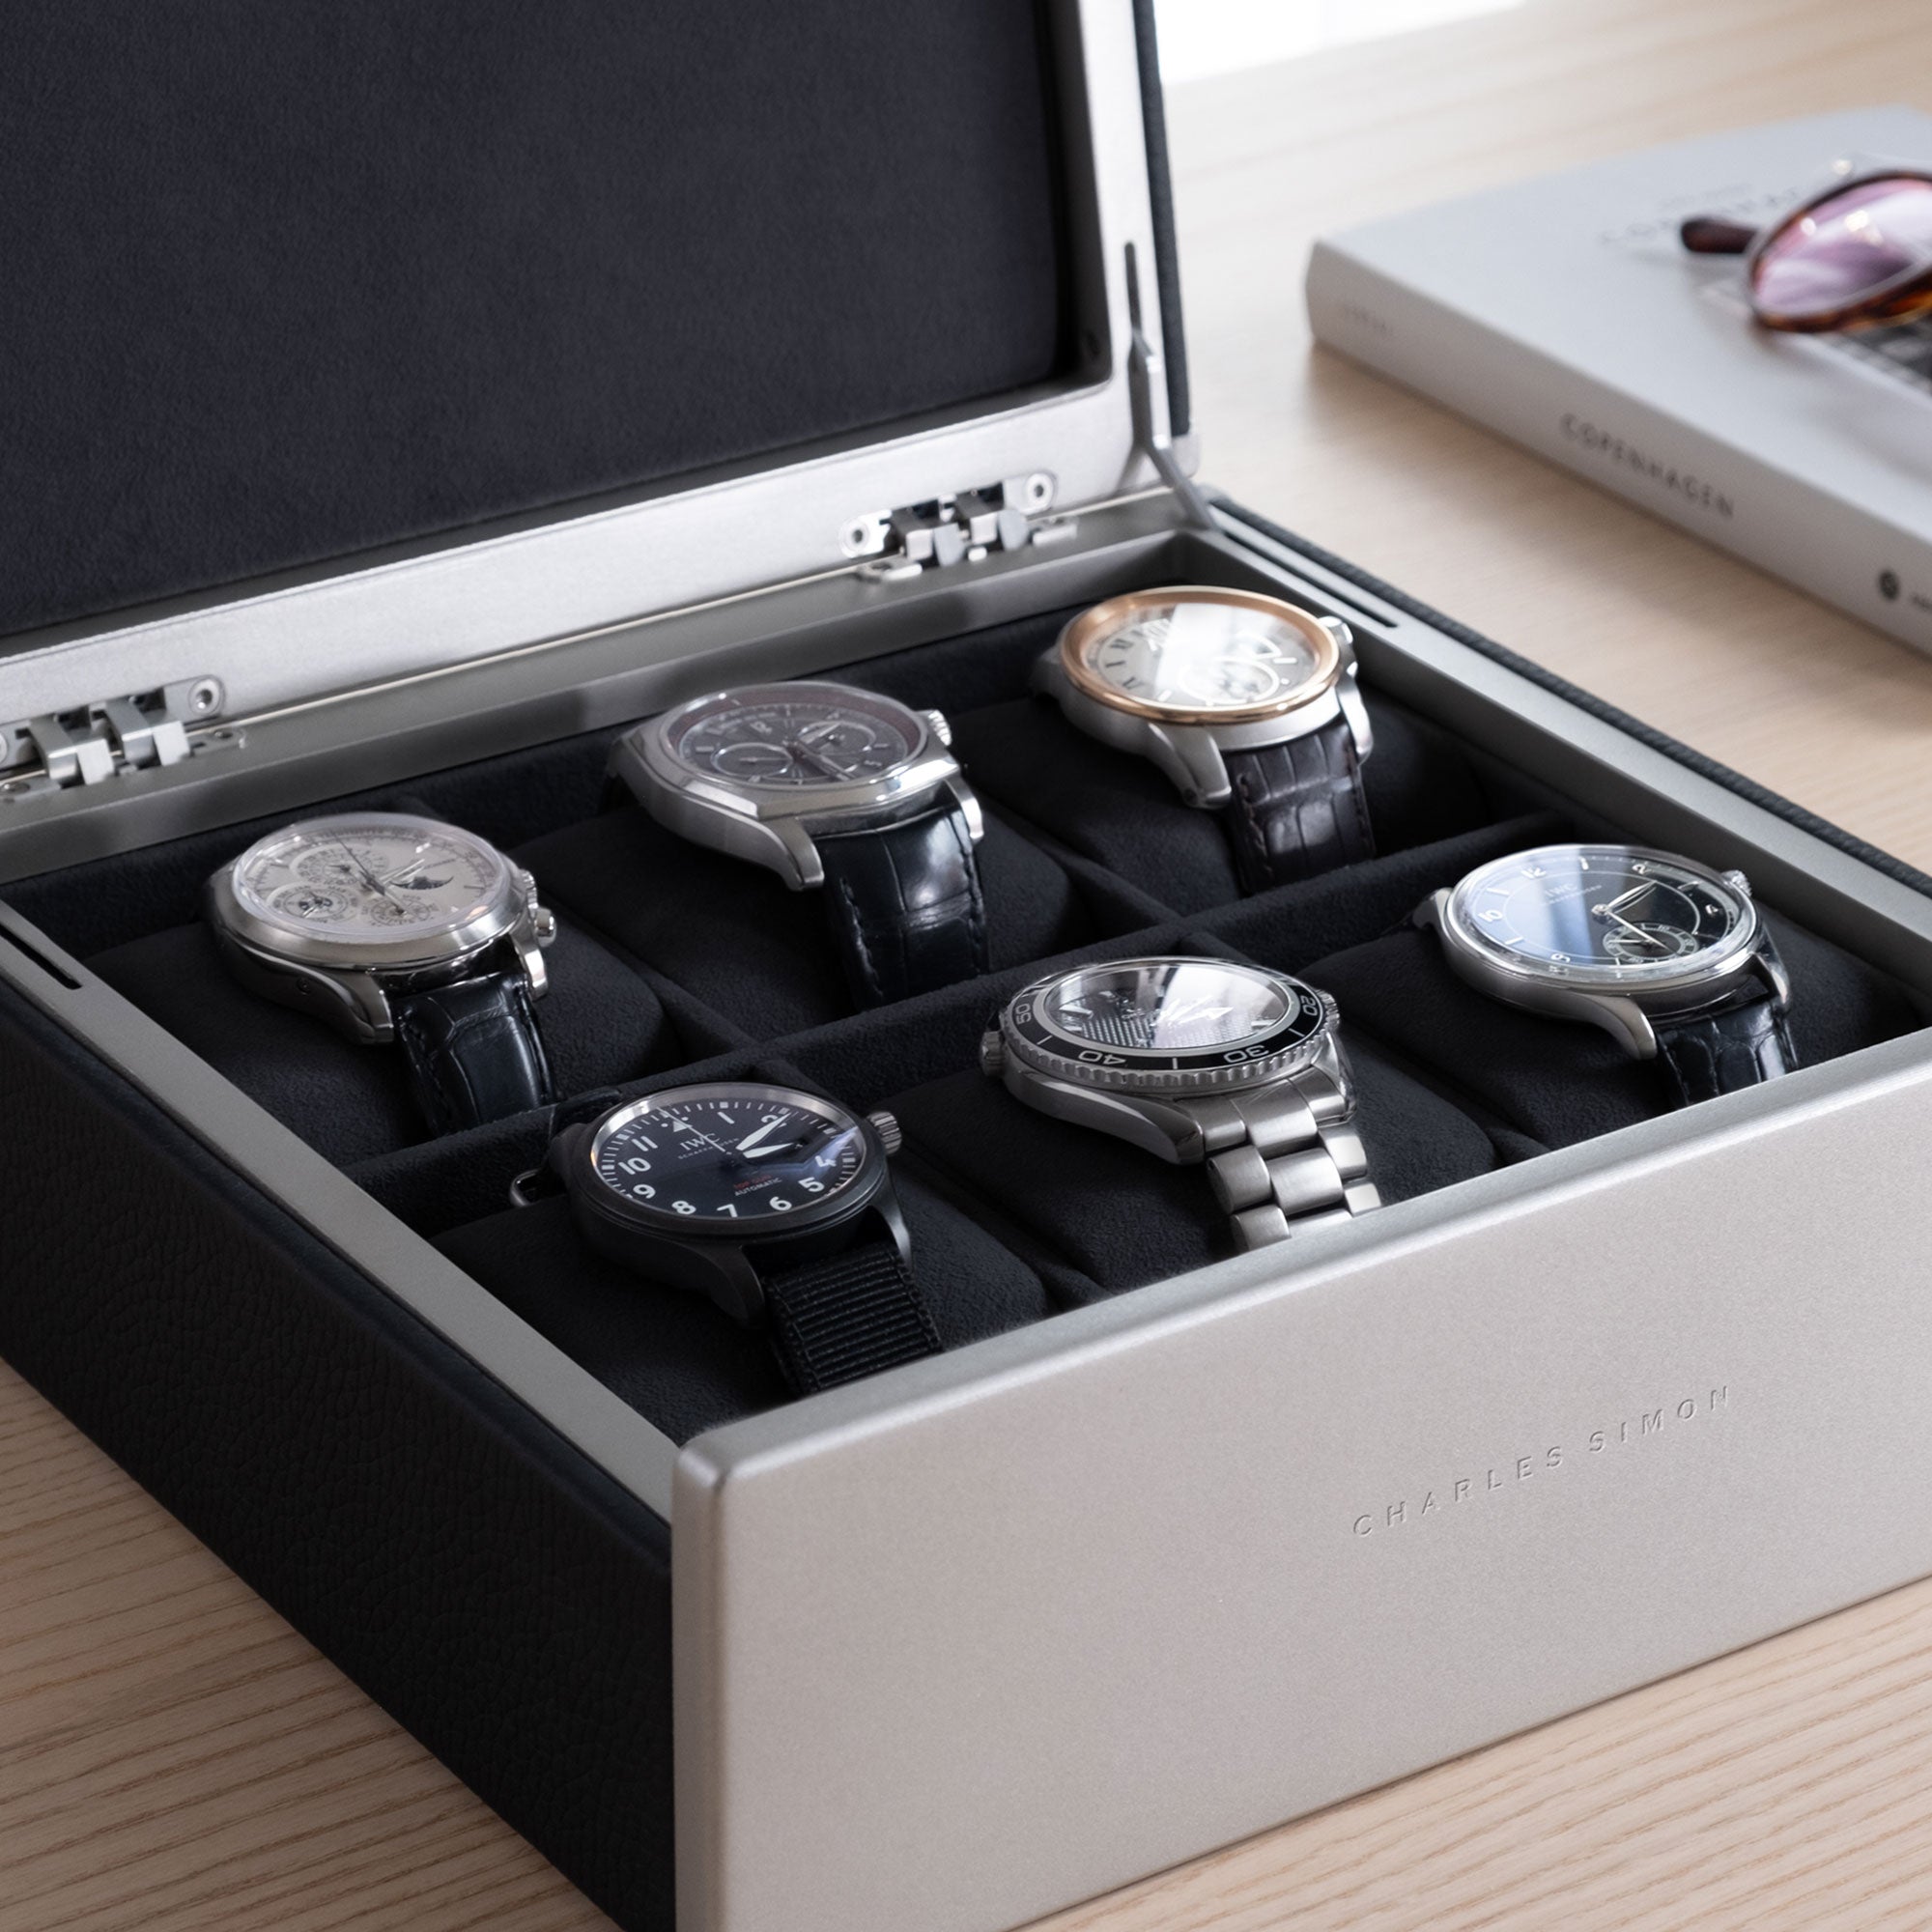 Lifestyle shot of luxury watches in Spence watch box for 6 watches. Made from black Alcantara interior and black leather